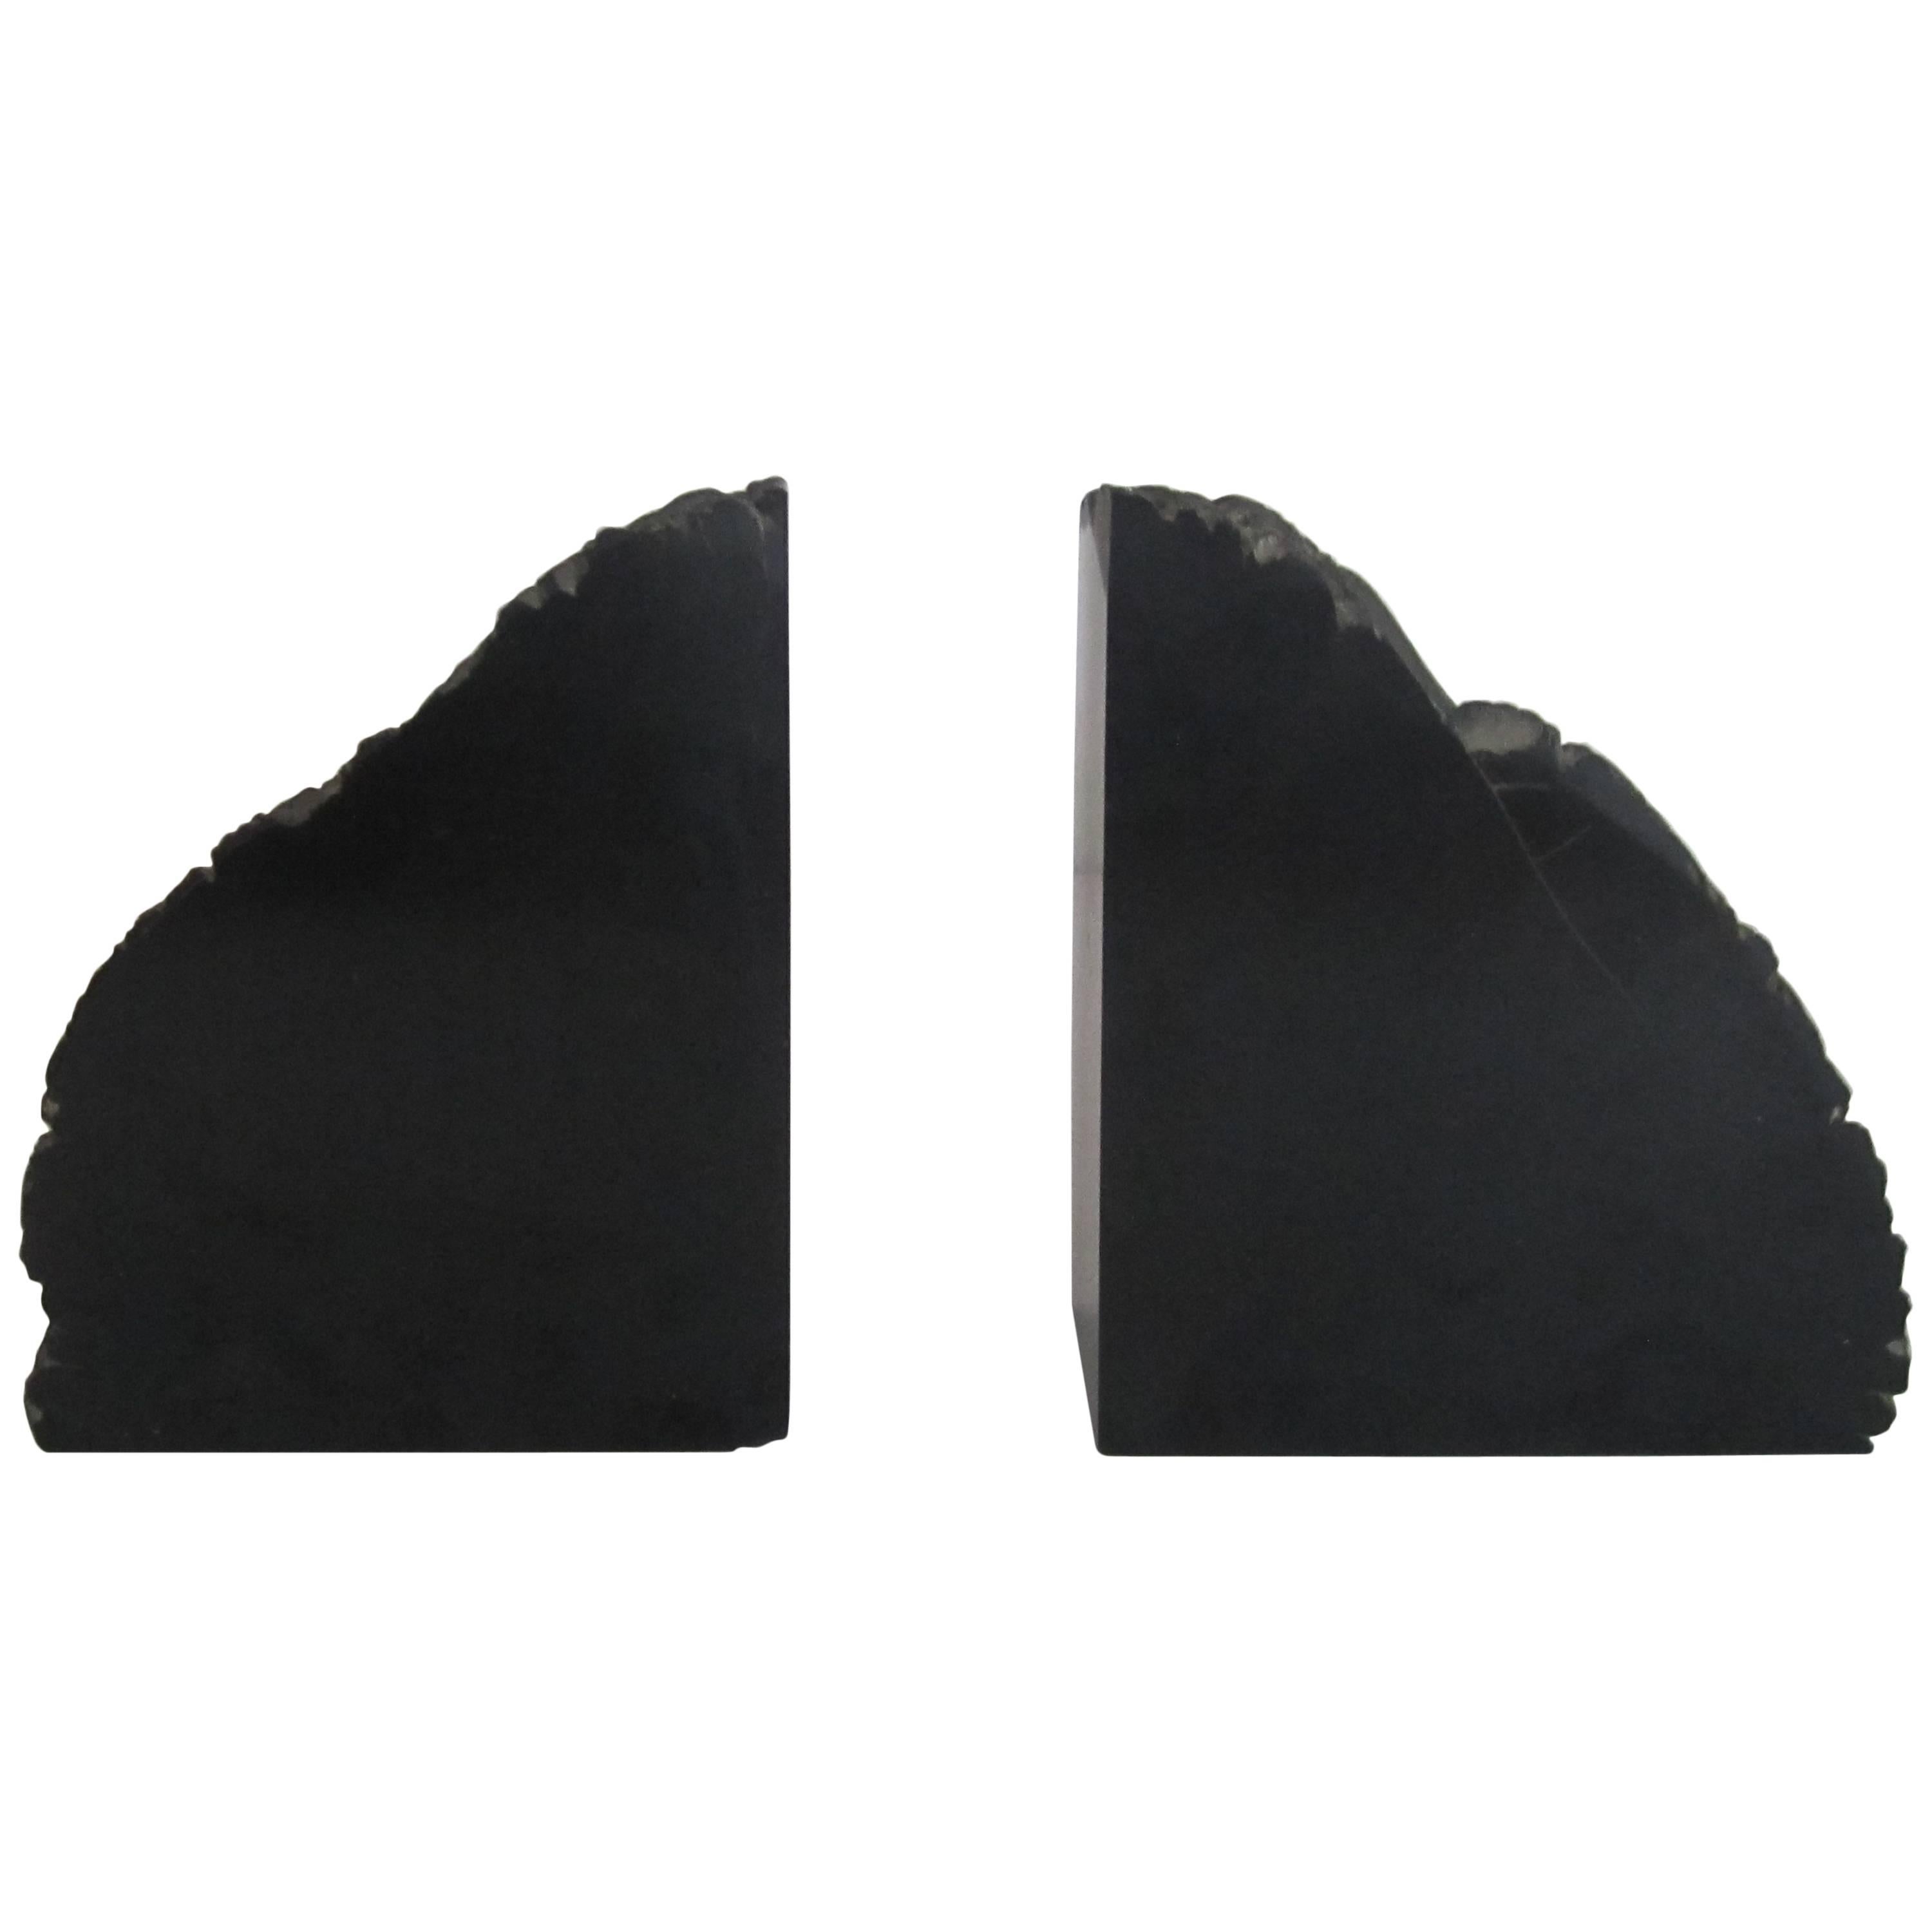 Pair of Vintage Black Natural Stone Bookends